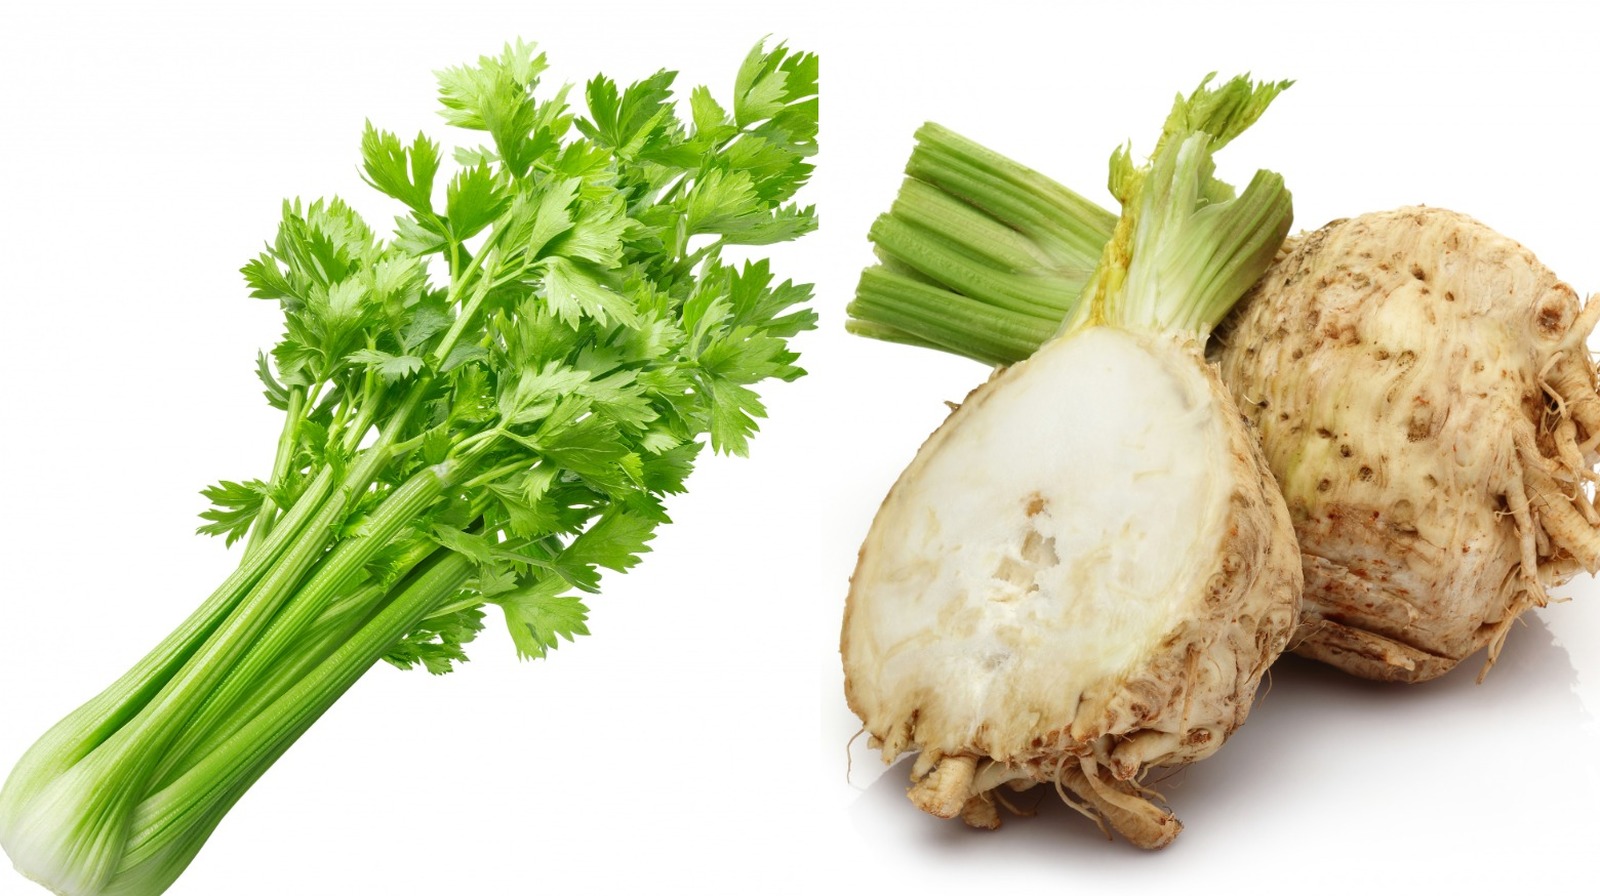 This Is What Makes Celery And Celeriac Different From Each Other